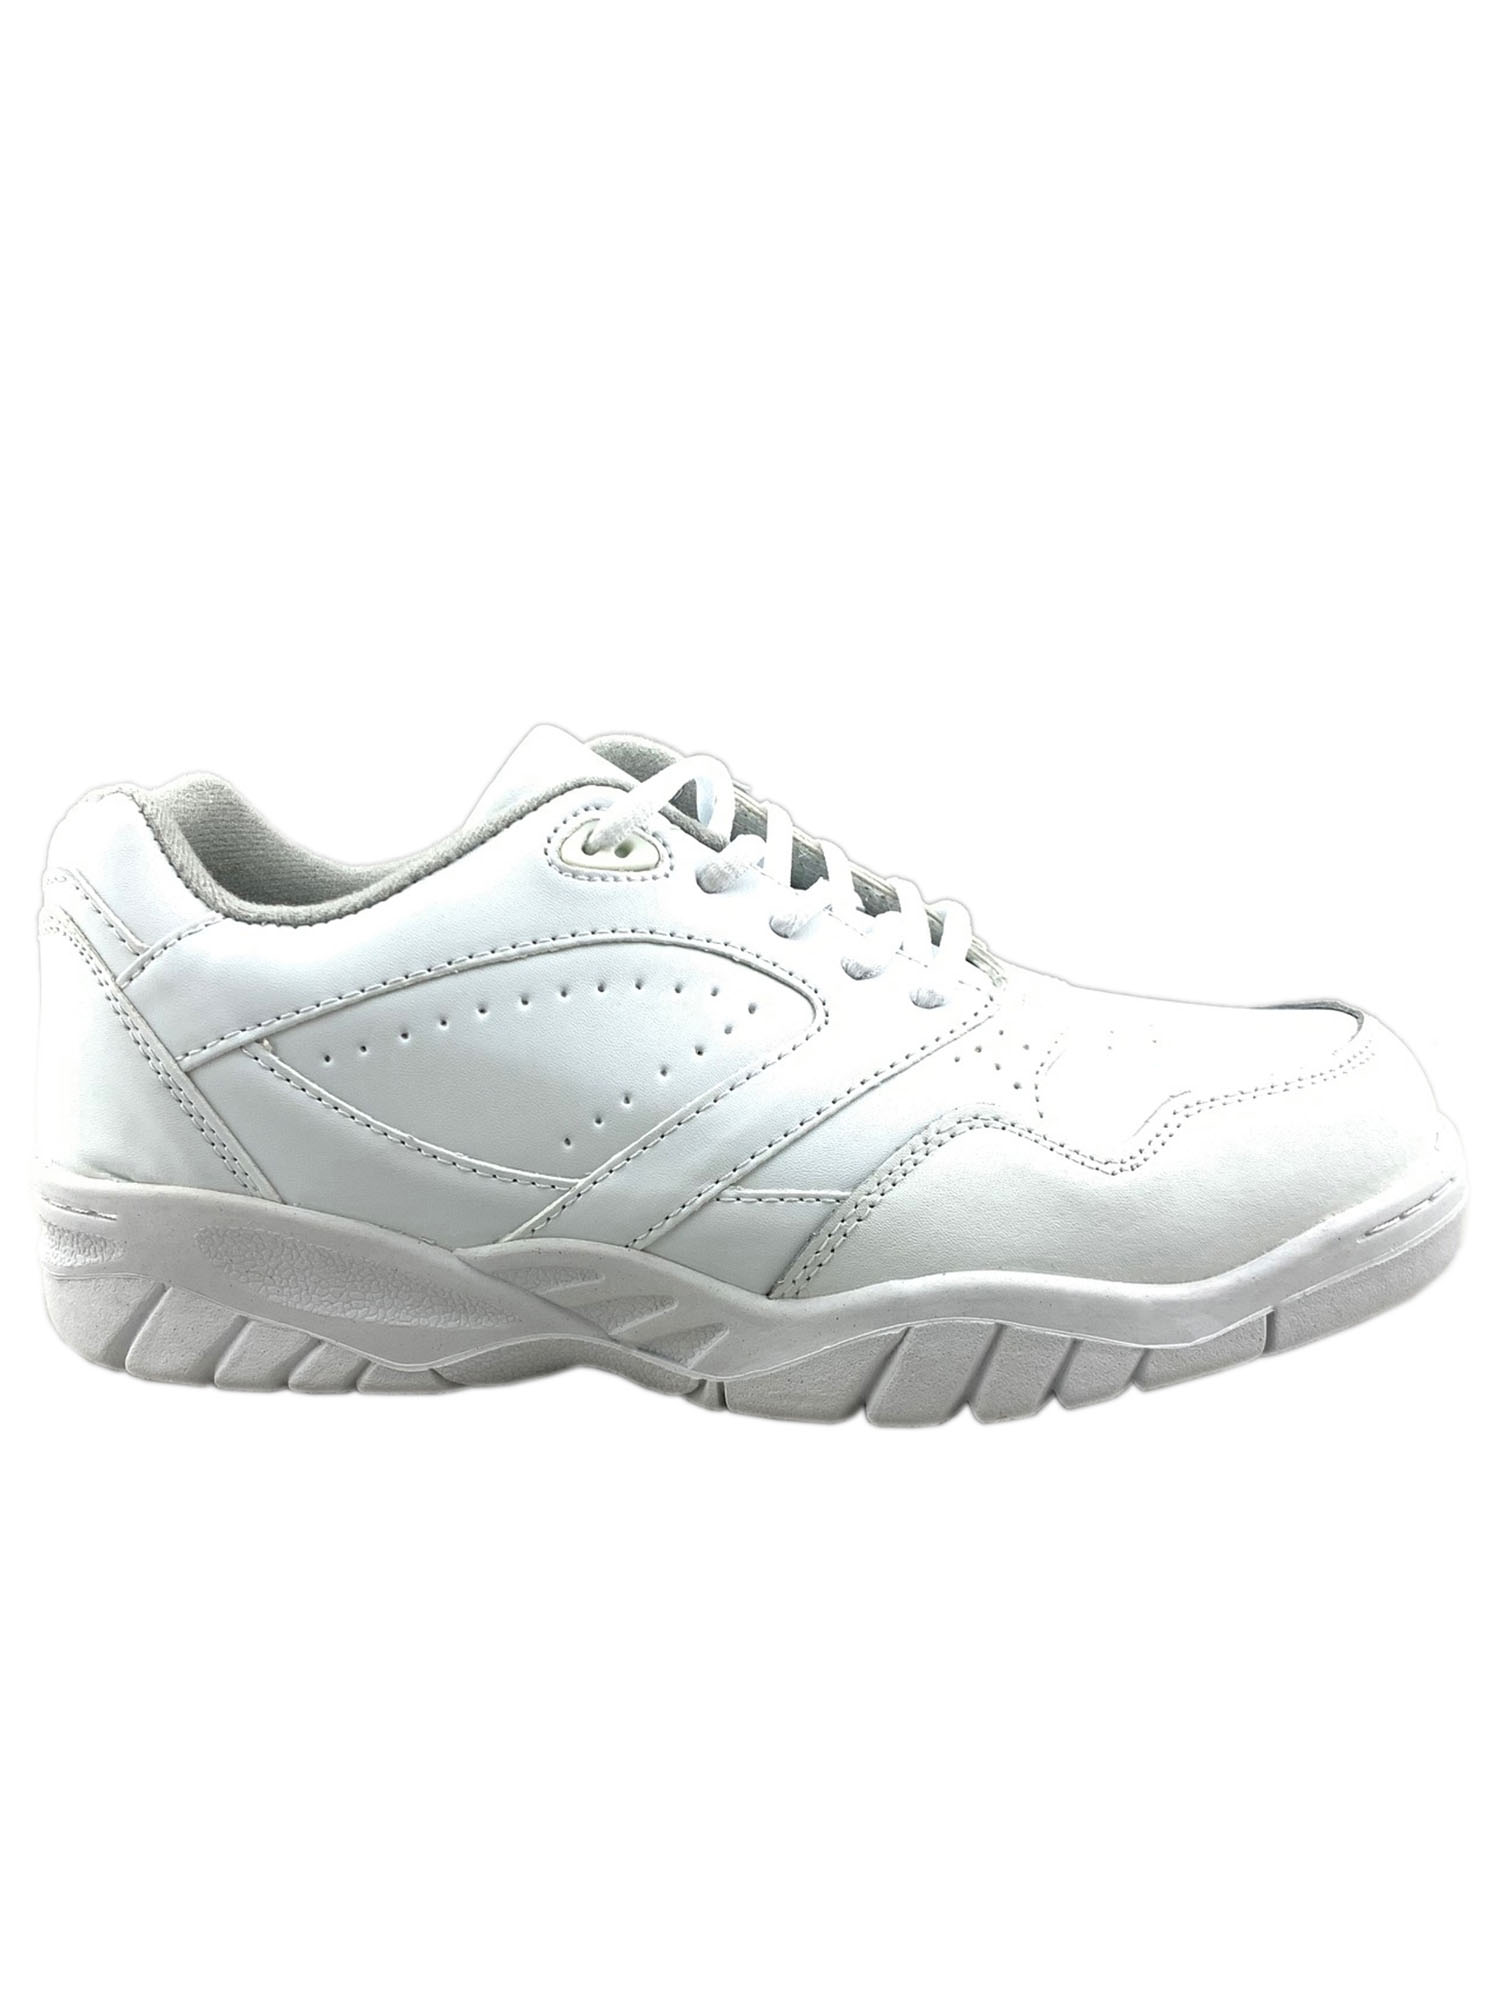 Tanleewa Men's Leather White Sports Shoes Lightweight Sneakers Breathable Casual Shoe Size 10 - image 1 of 5